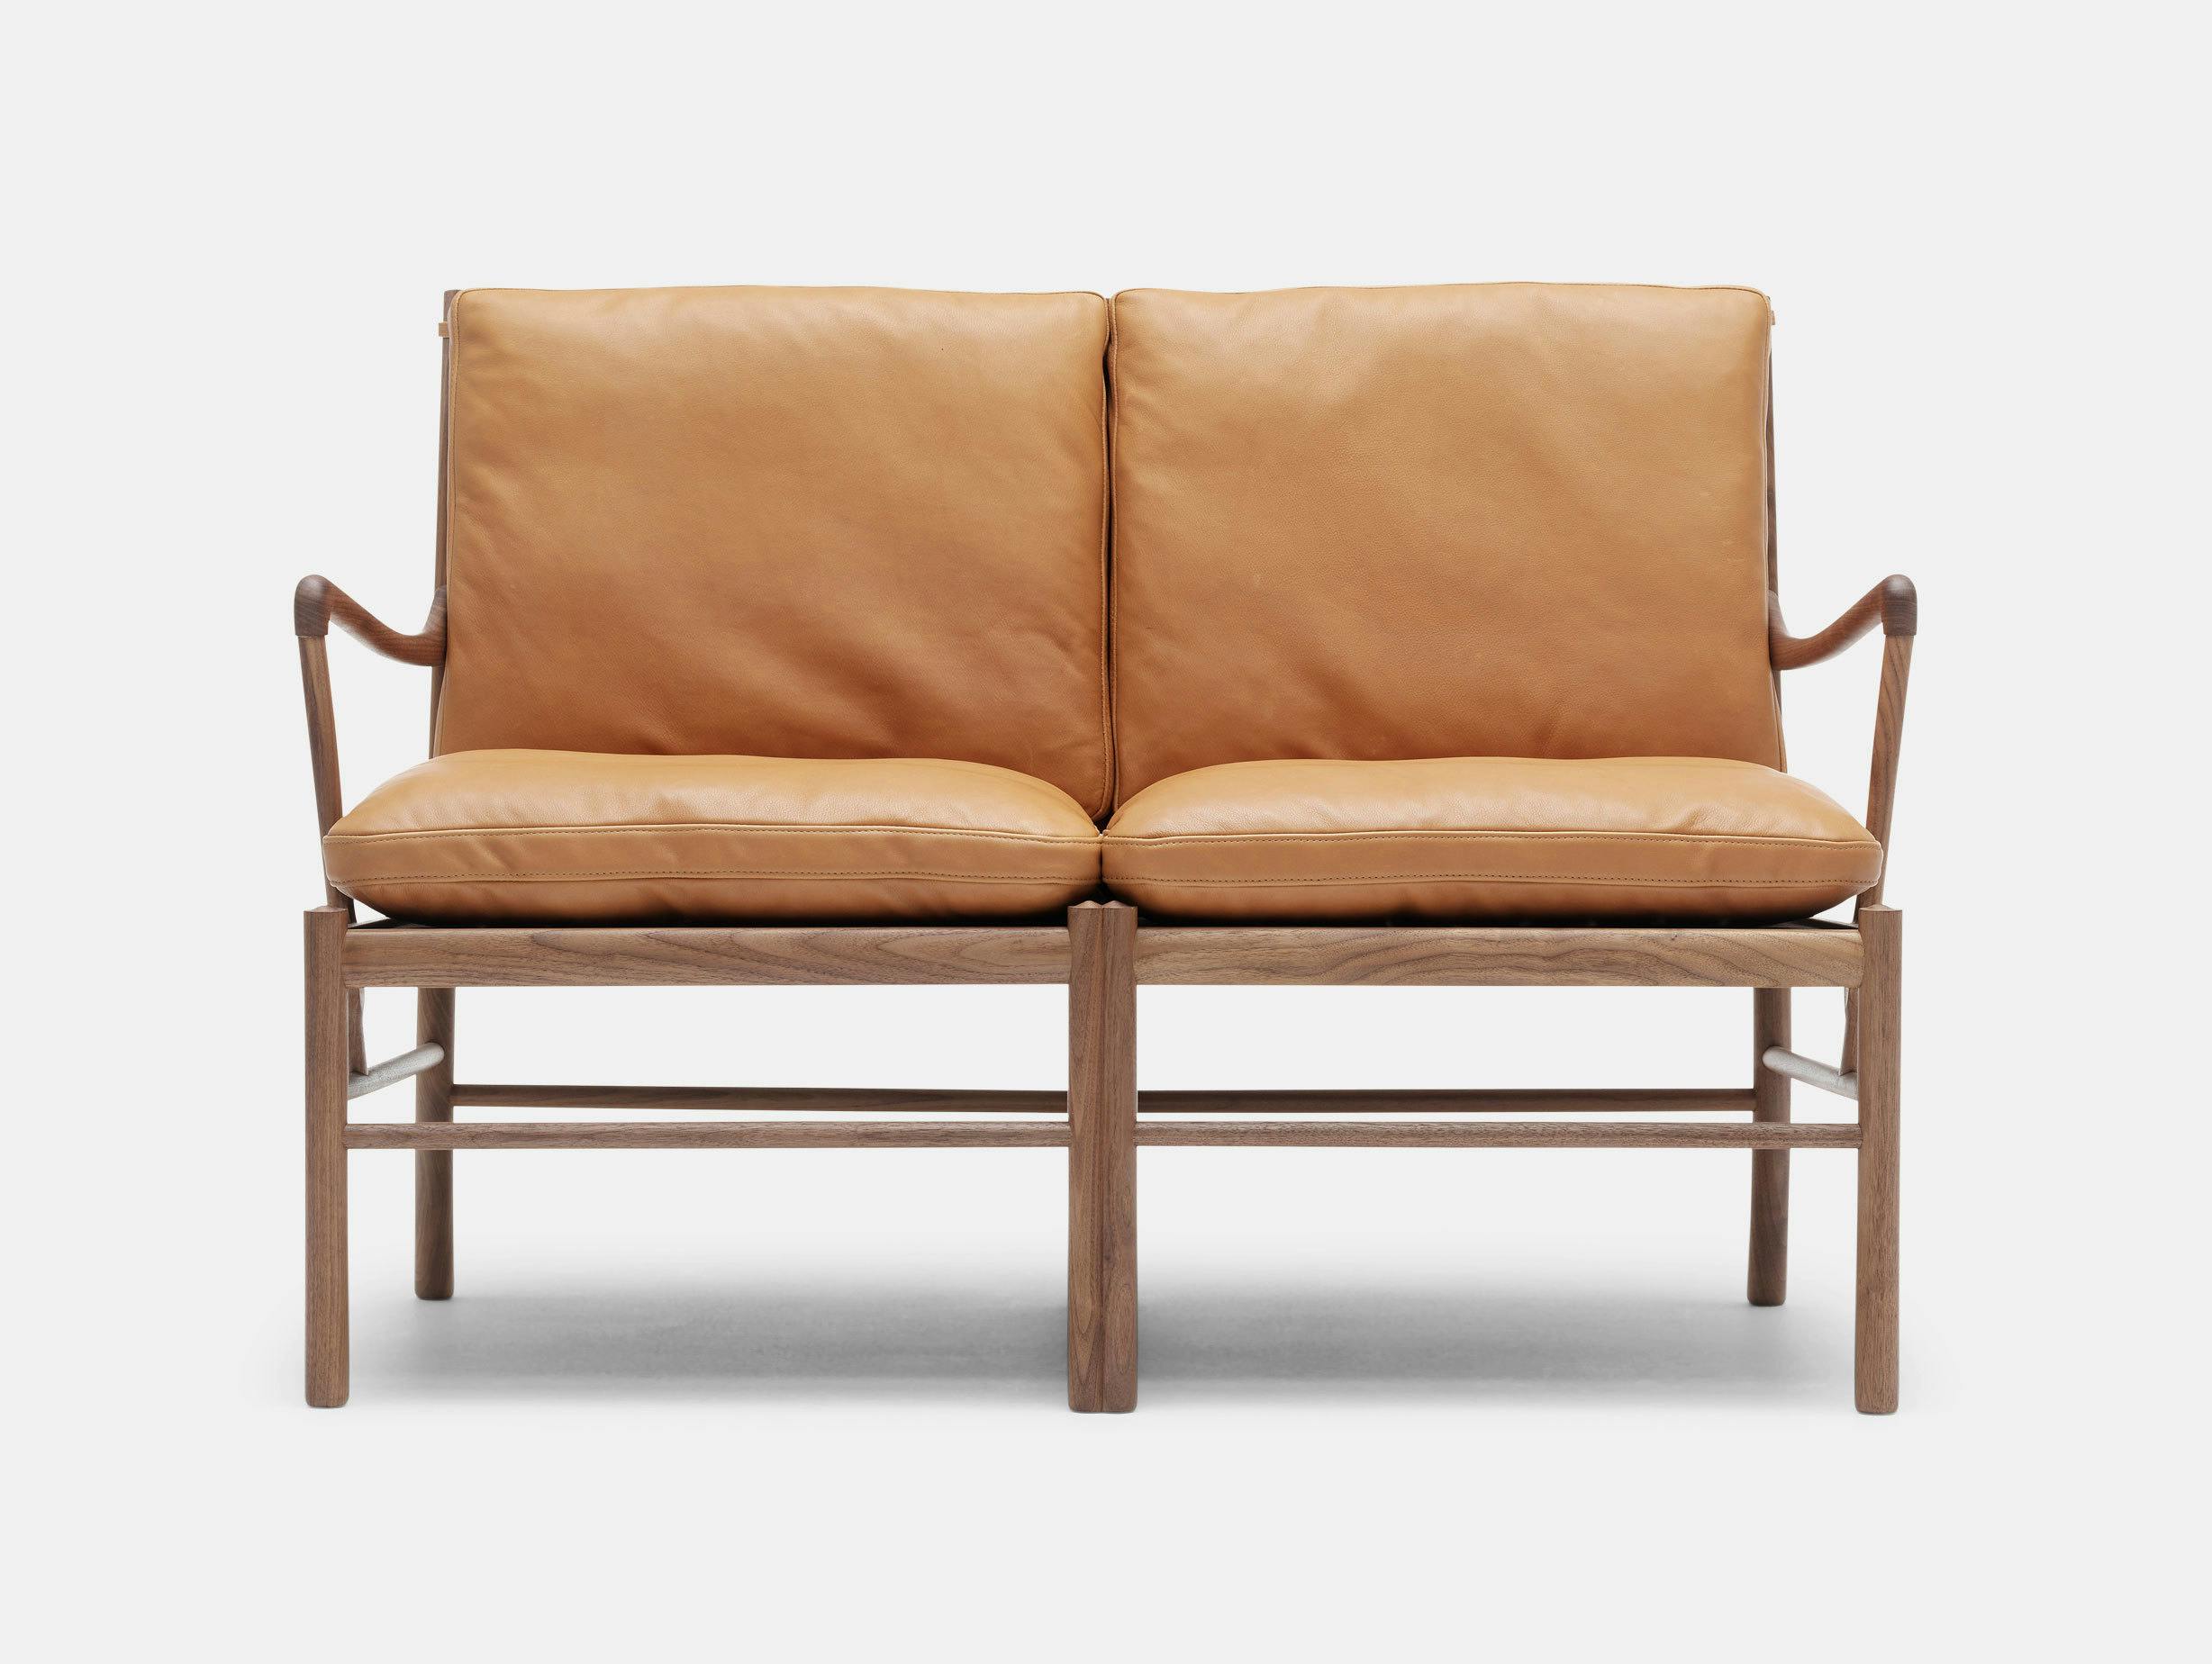 Carl Hansen Ow149 2 Colonial Sofa Walnut Tan Leather Front Ole Wanscher